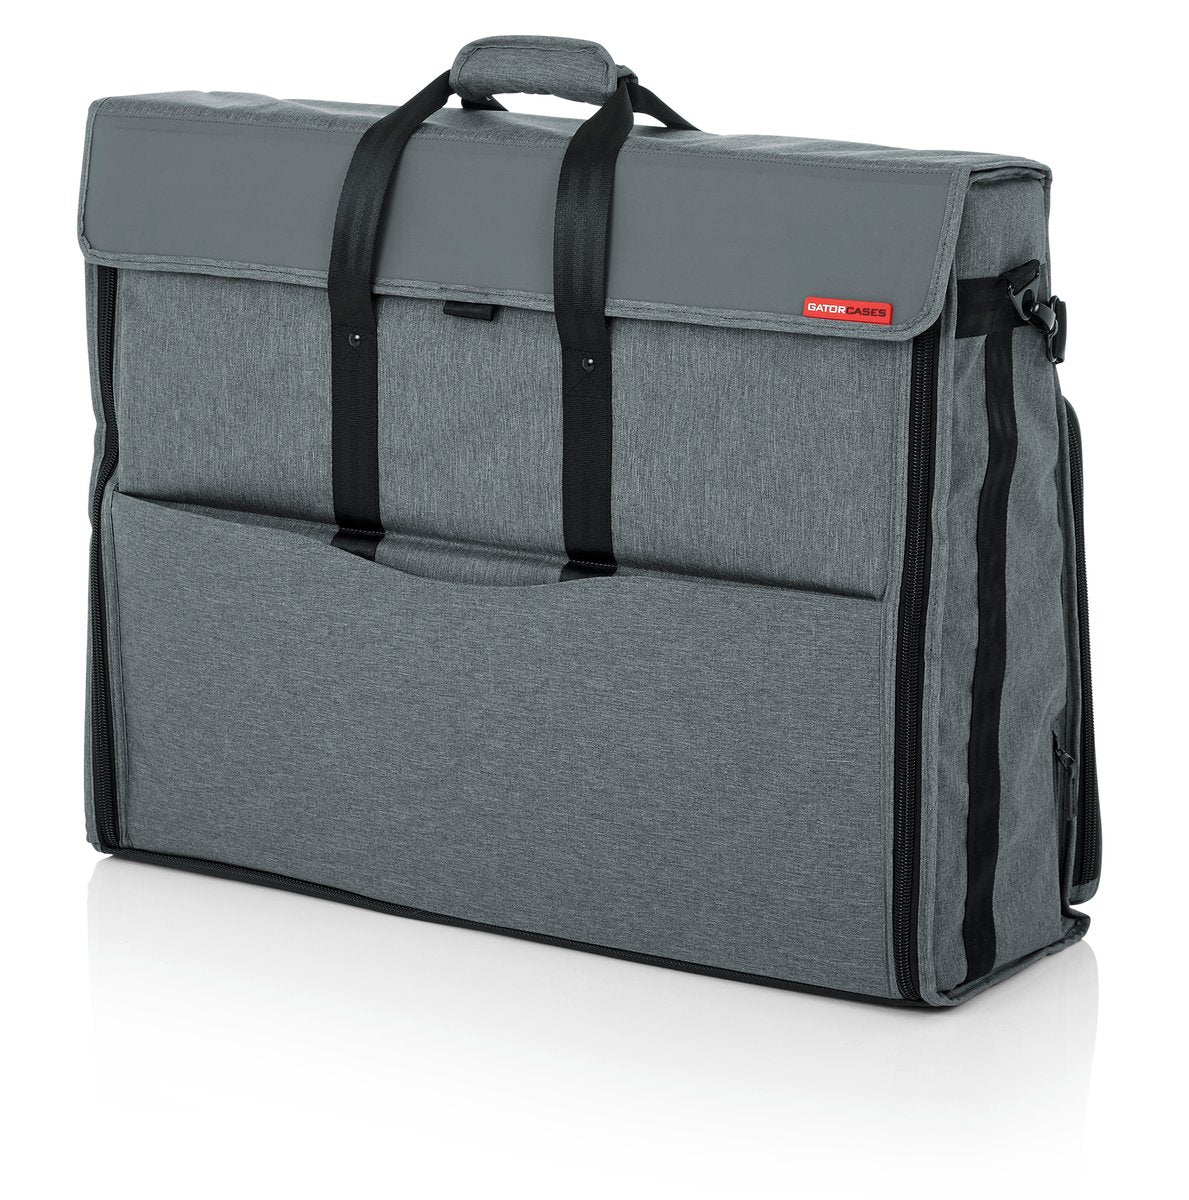 Creative Pro Padded Nylon Tote Bag for Transporting 27" Apple iMac Computers